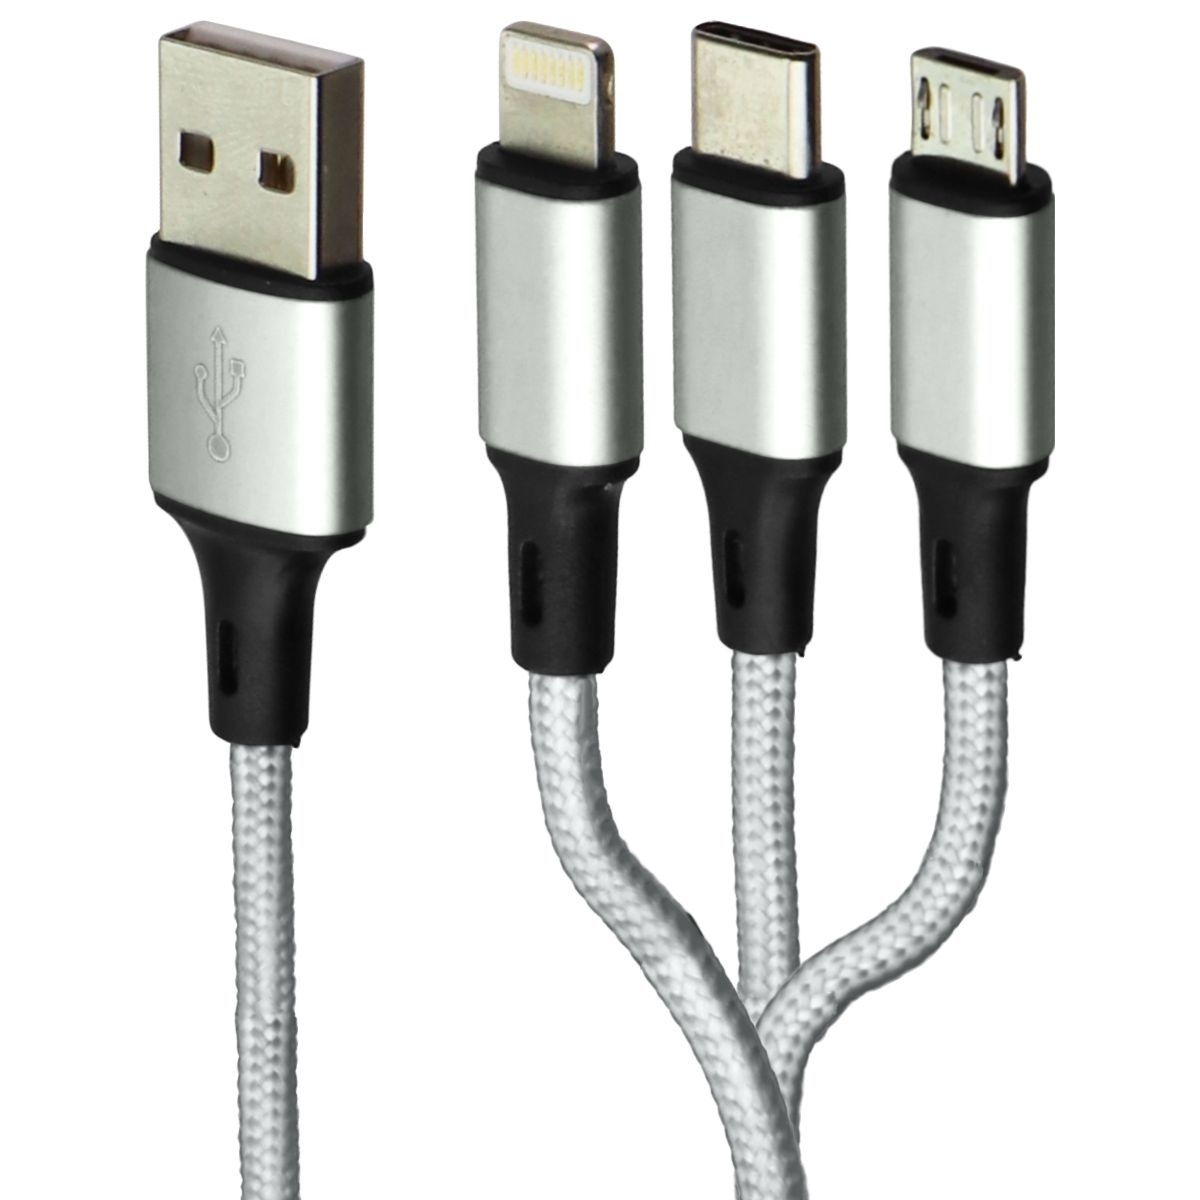 Zoda 3-in-1 USB-C/Lightning 8-Pin/Micro USB Braided Cable (4FT) - Silver